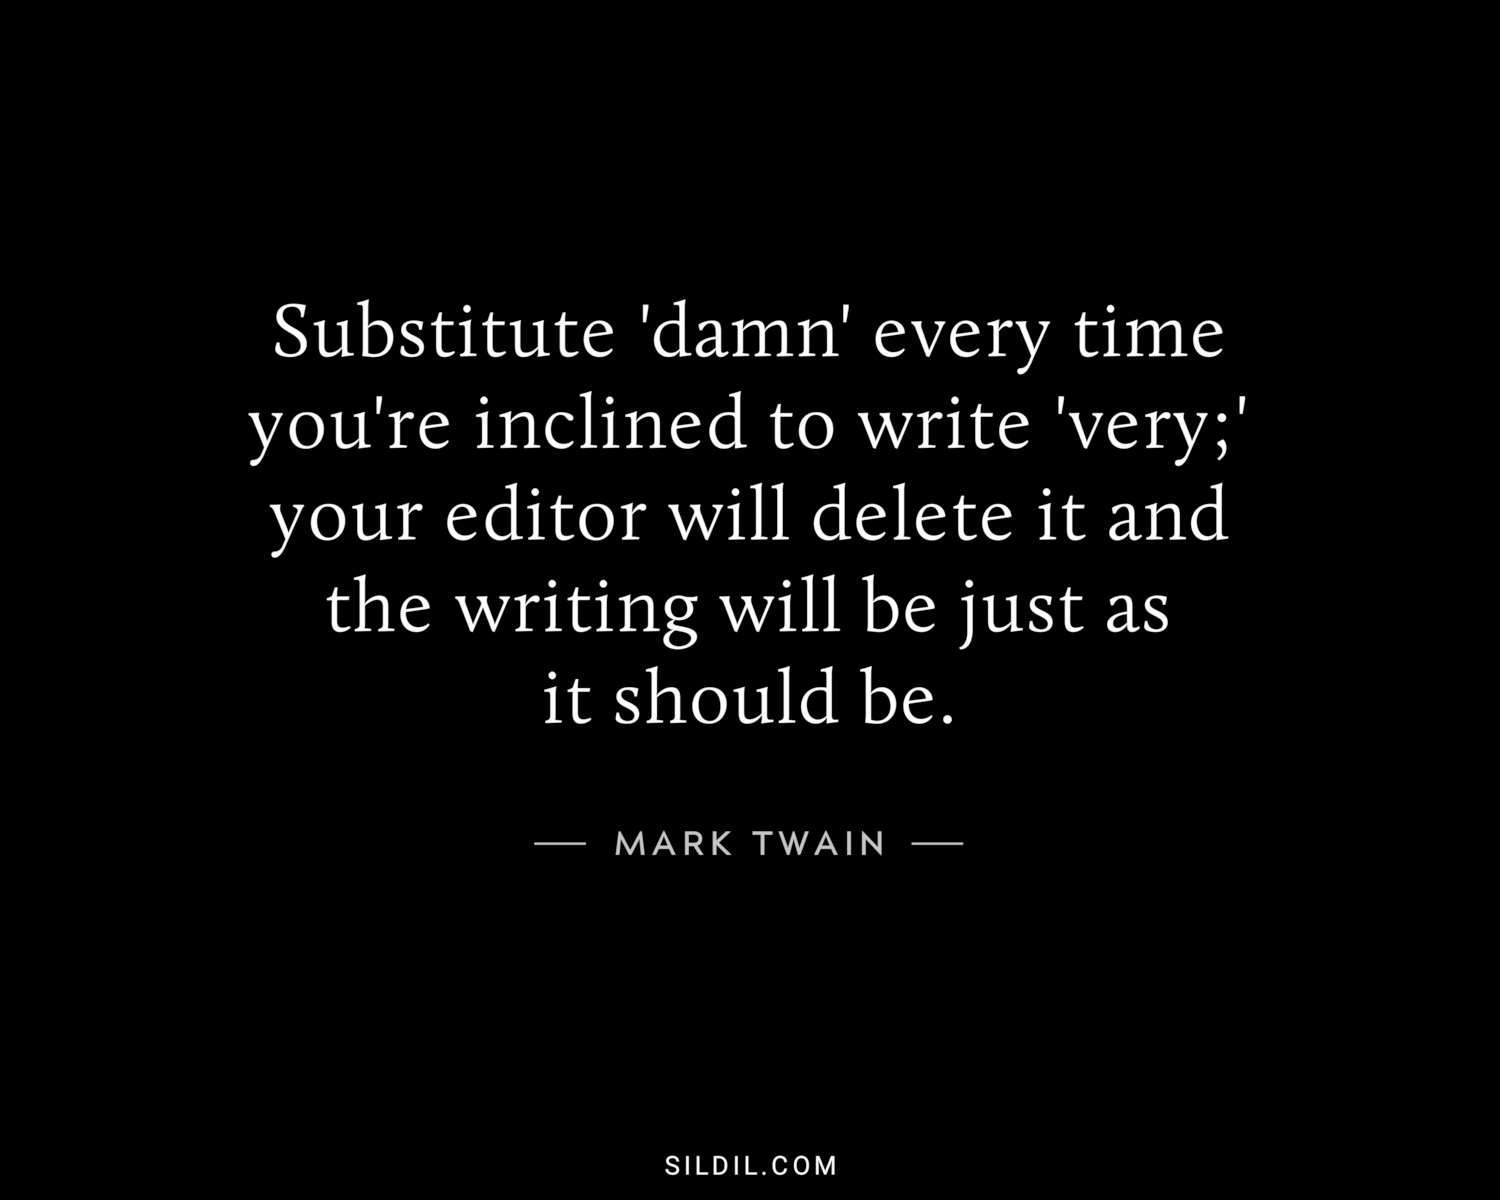 Substitute 'damn' every time you're inclined to write 'very;' your editor will delete it and the writing will be just as it should be.